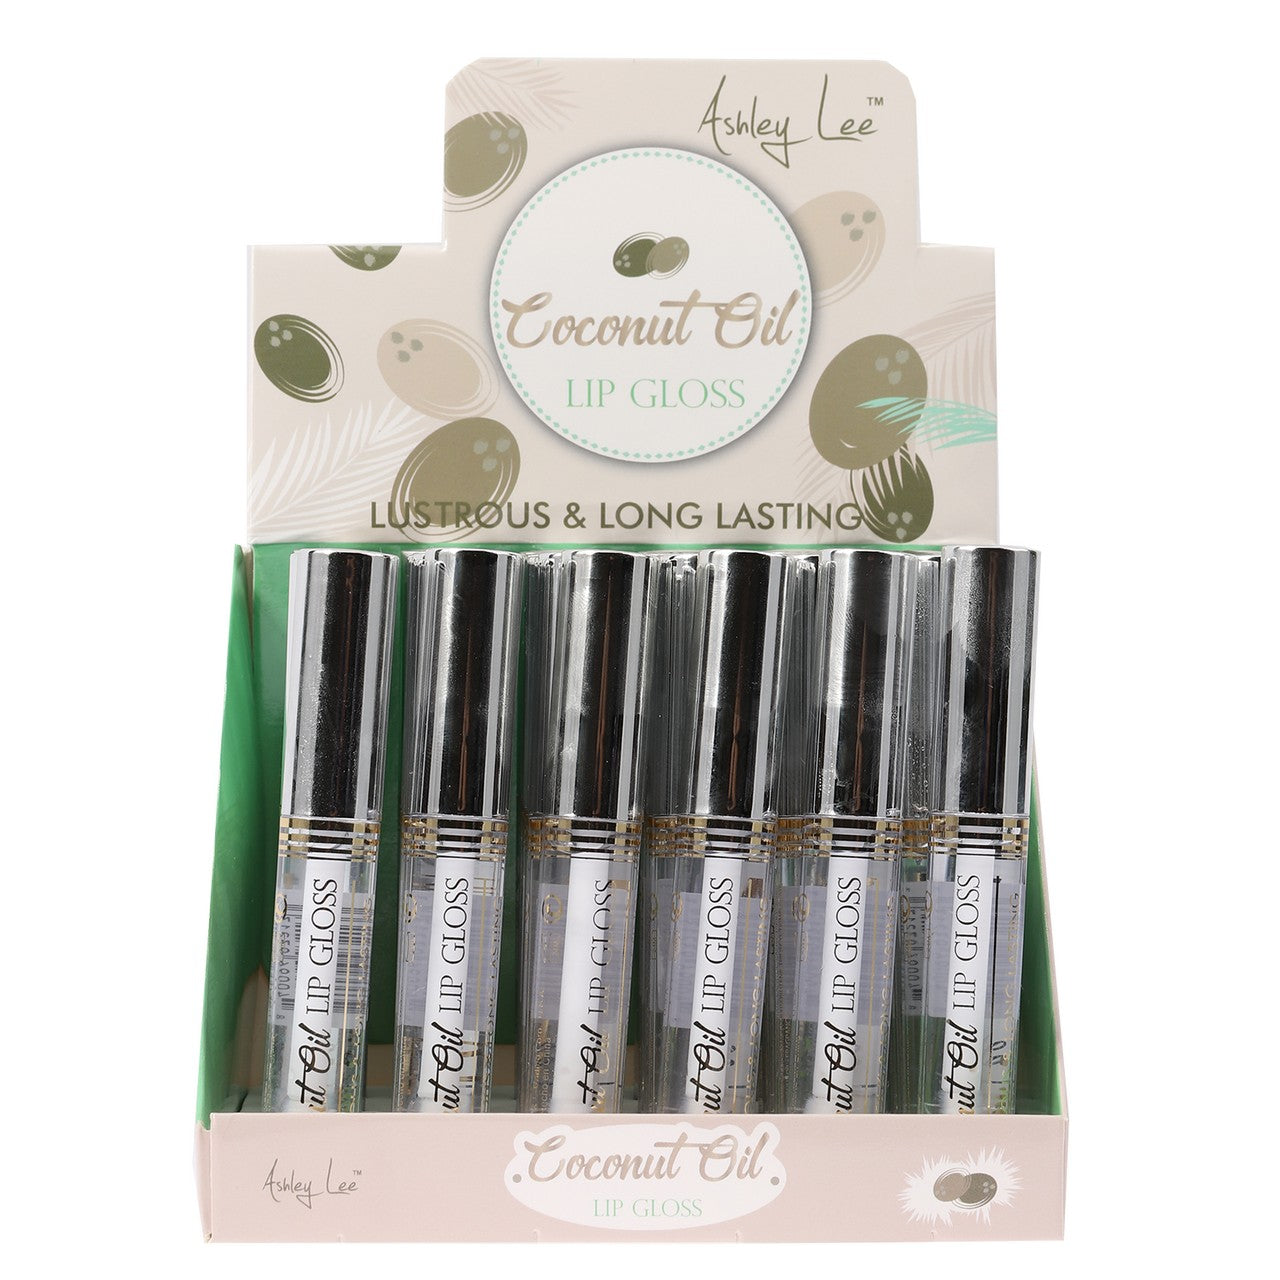 ASHLEY LEE CLEAR LIPGLOSS BOTTLE COCONUT OIL 0.1fl oz - VIP Extensions